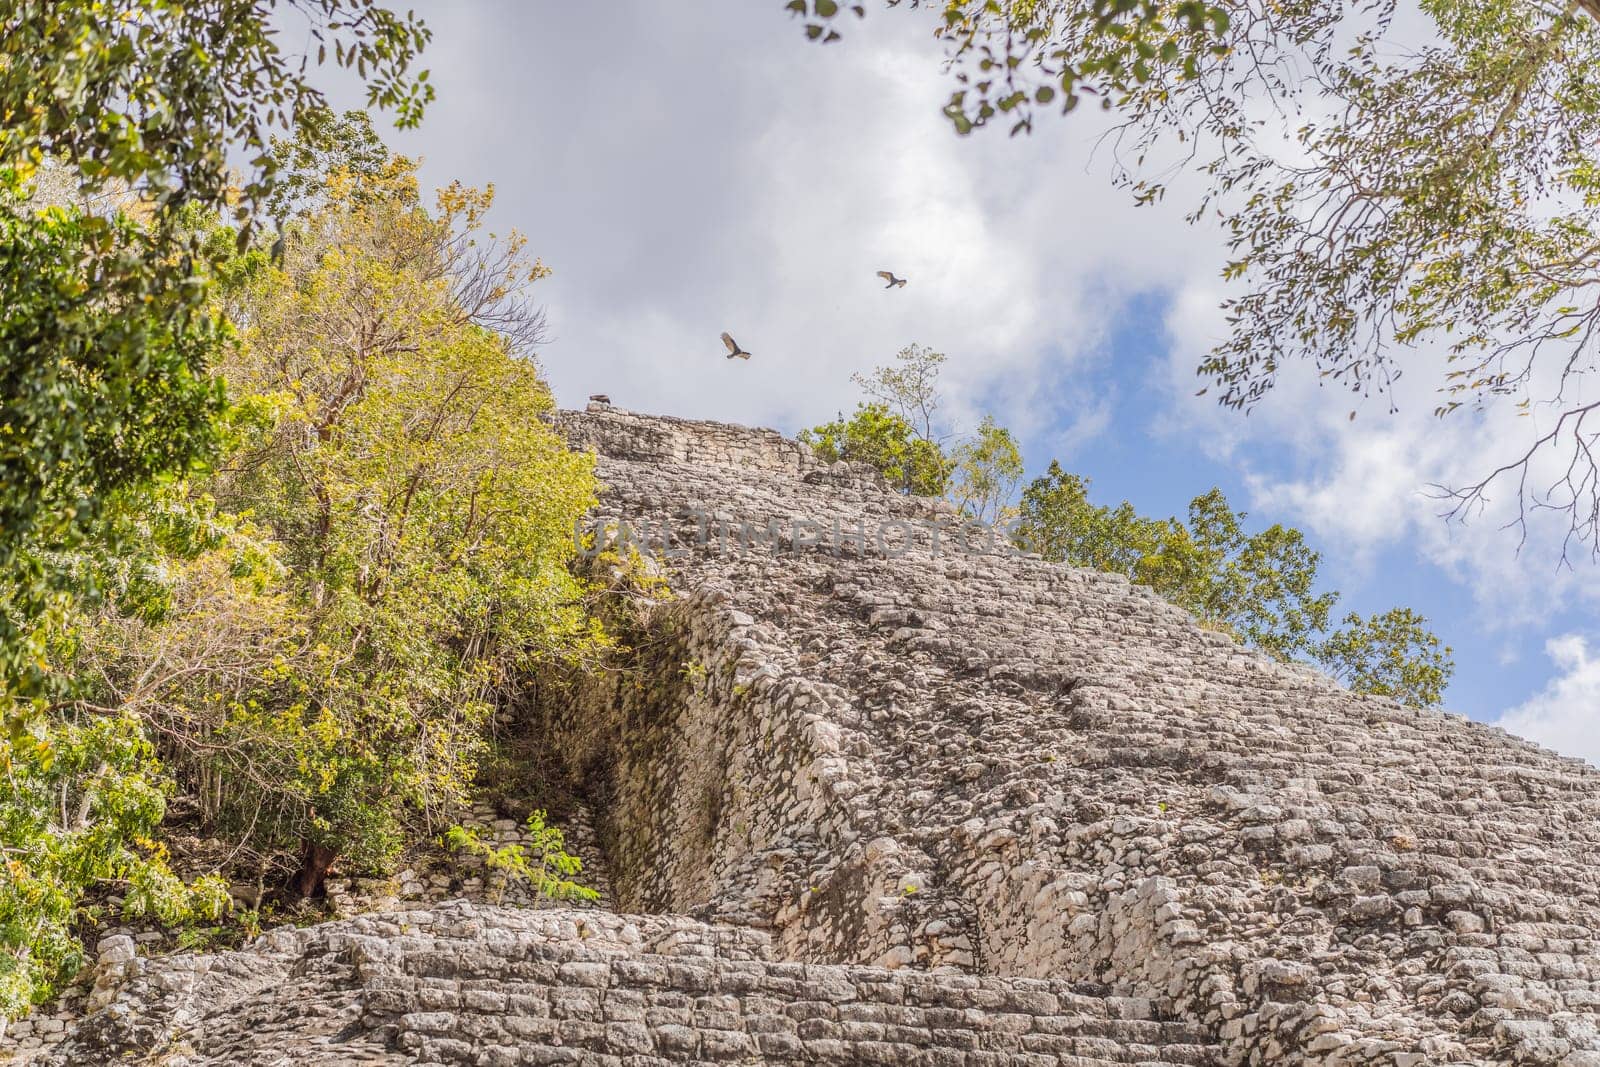 Coba, Mexico. Ancient mayan city in Mexico. Coba is an archaeological area and a famous landmark of Yucatan Peninsula. Cloudy sky over a pyramid in Mexico.